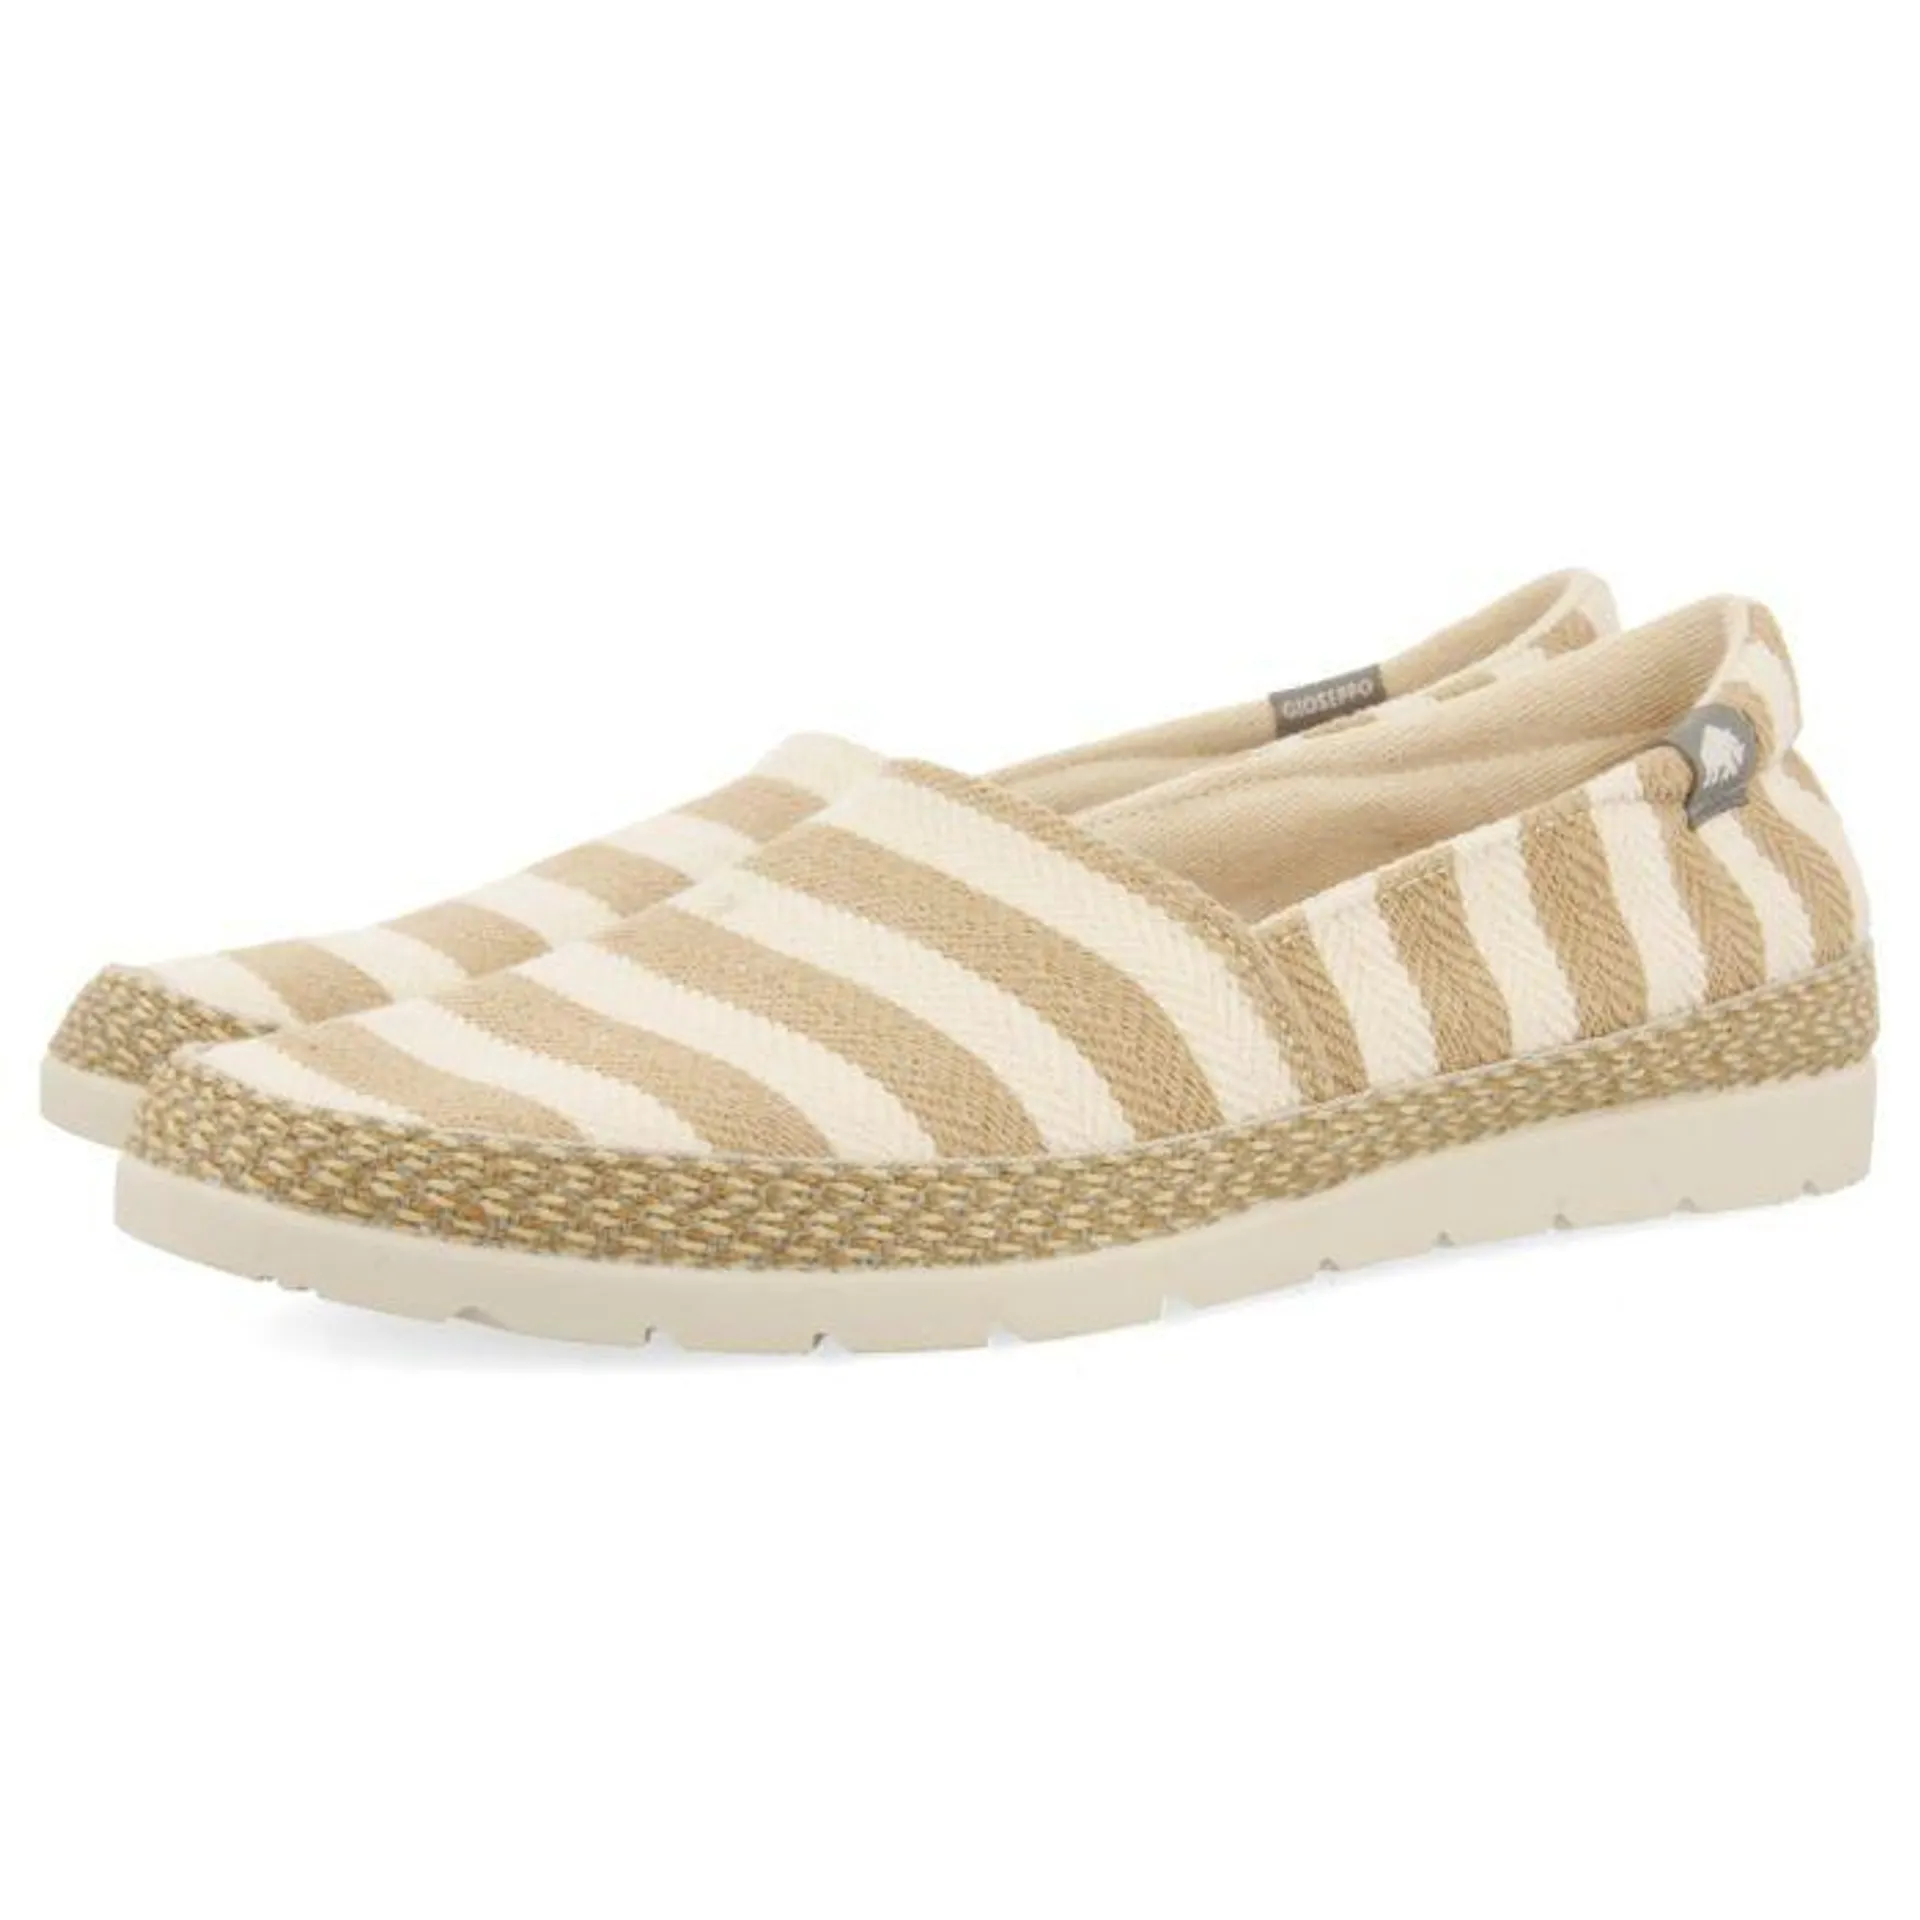 BEIGE COLOR ESPADRILLES CAMPING STYLE WITH RECYCLED COTTON FOR MEN STROUD